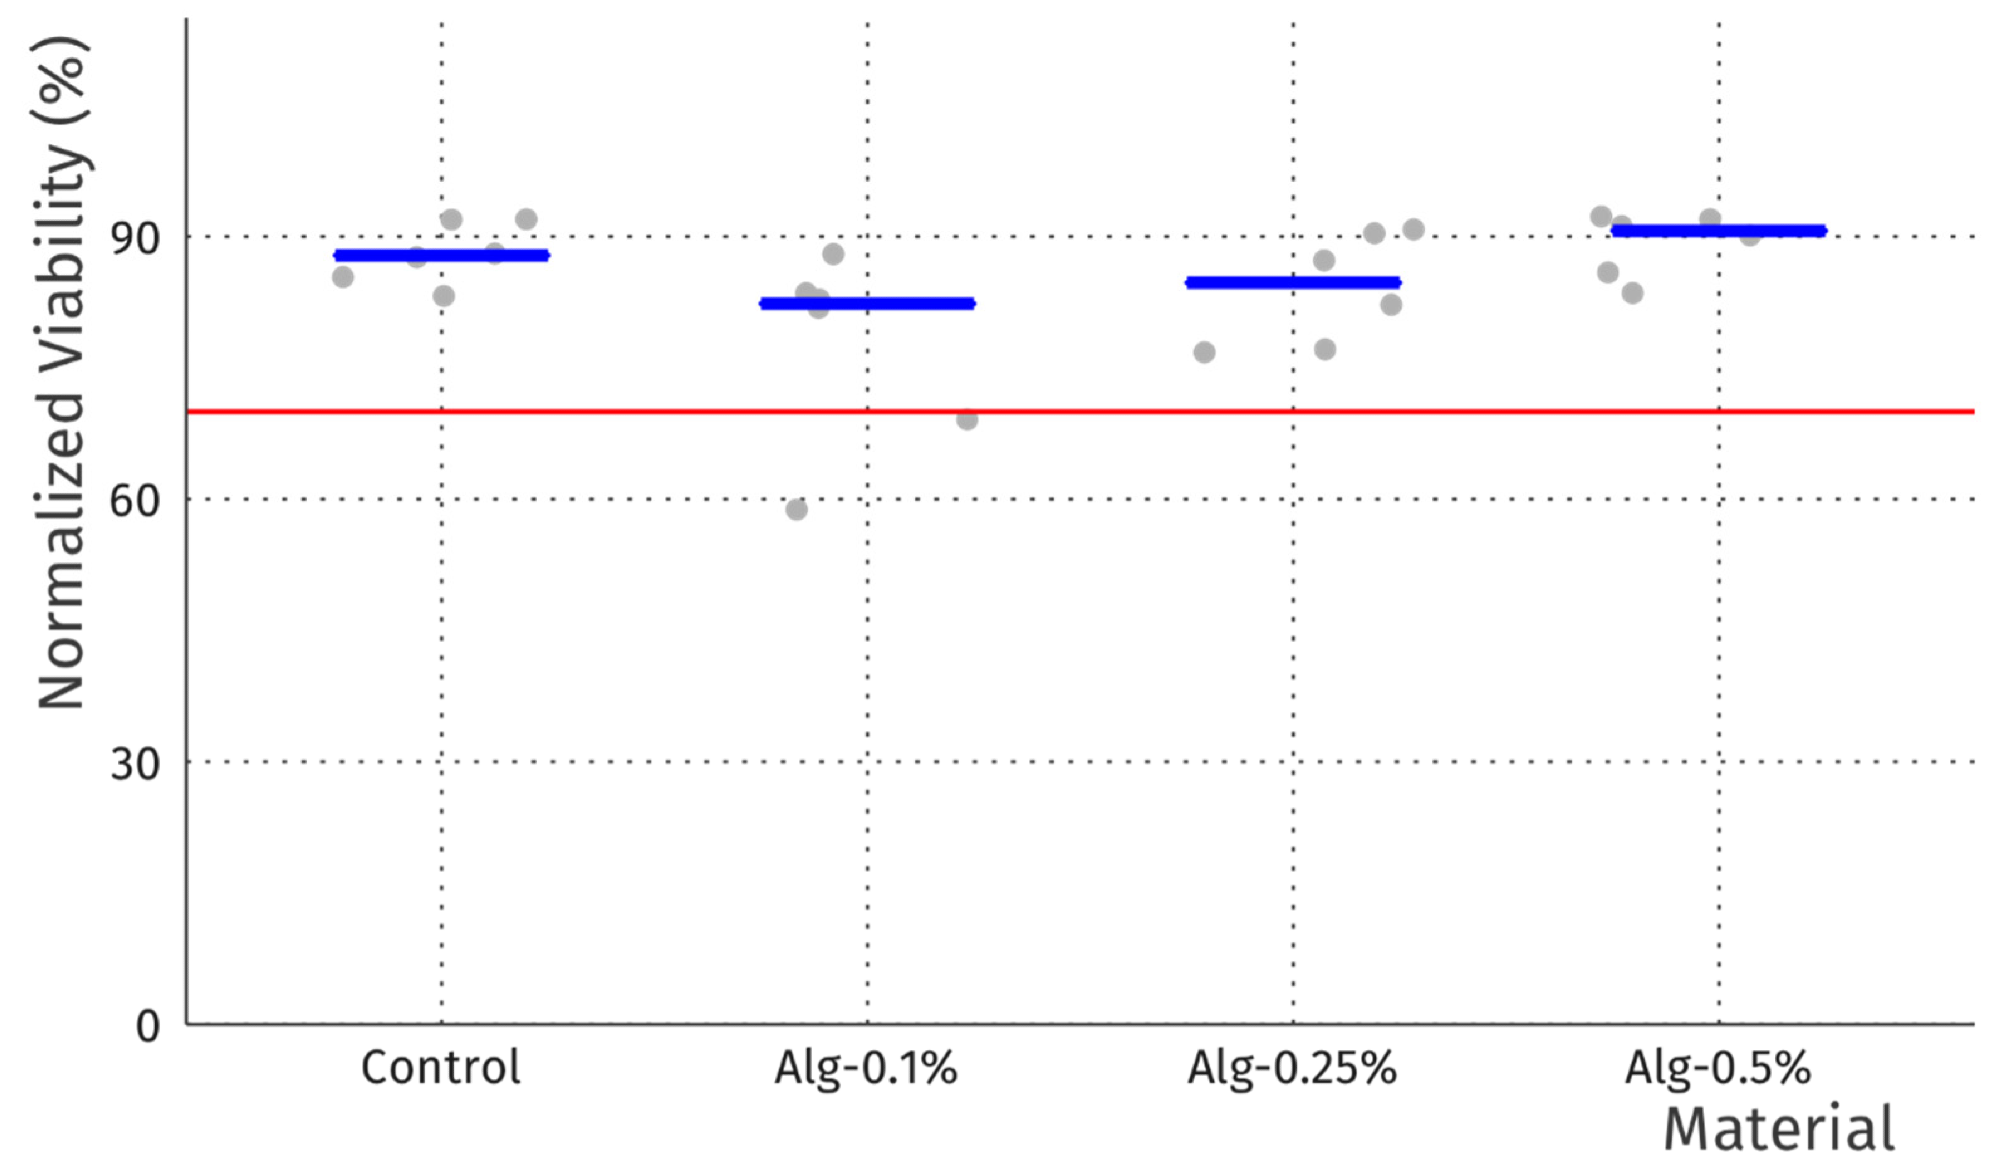 Cell viability data normalized to sham control (no disc) for alginate films with MEL and control film without MEL. Grey dots represent individual samples (n = 6), while blue bars indicate median values. Red line marks the 70% viability threshold of ISO10993-5.